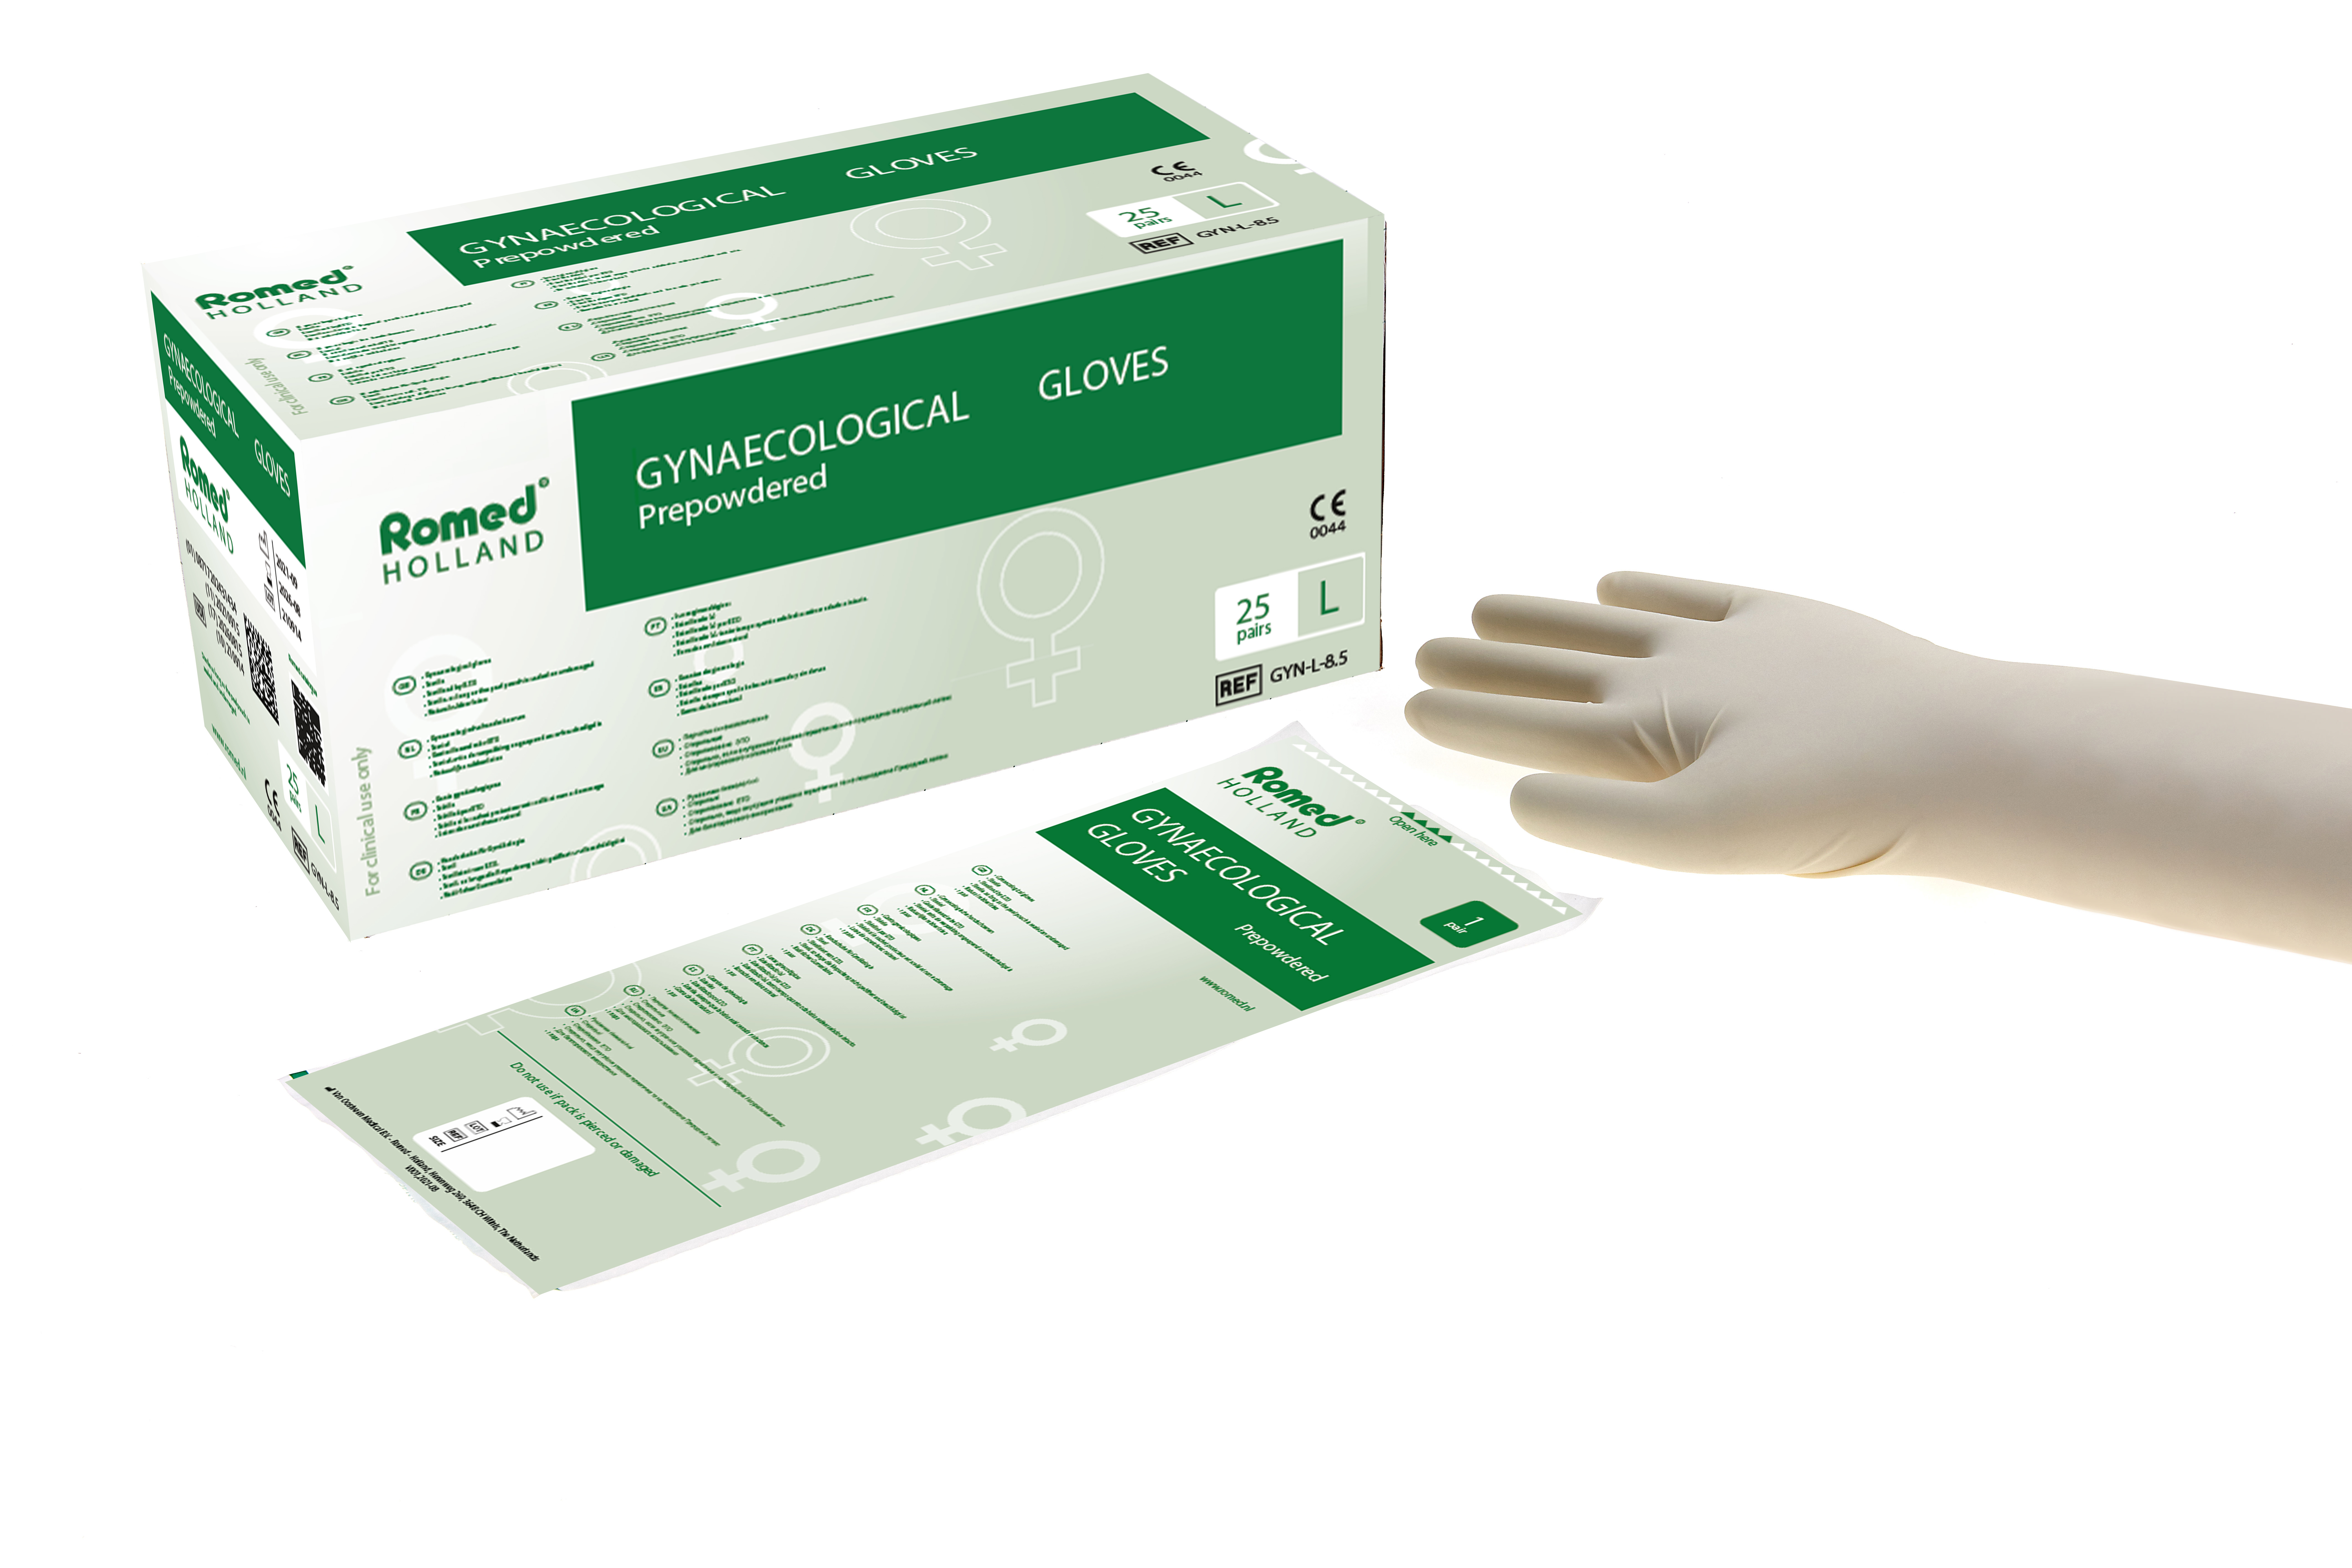 GYN-S-6.5 Romed gynaecological gloves, length 50cm, prepowdered, size small, sterile per pair, 25 pairs in an inner box, 4 x 25 pairs = 100 pairs in a carton.